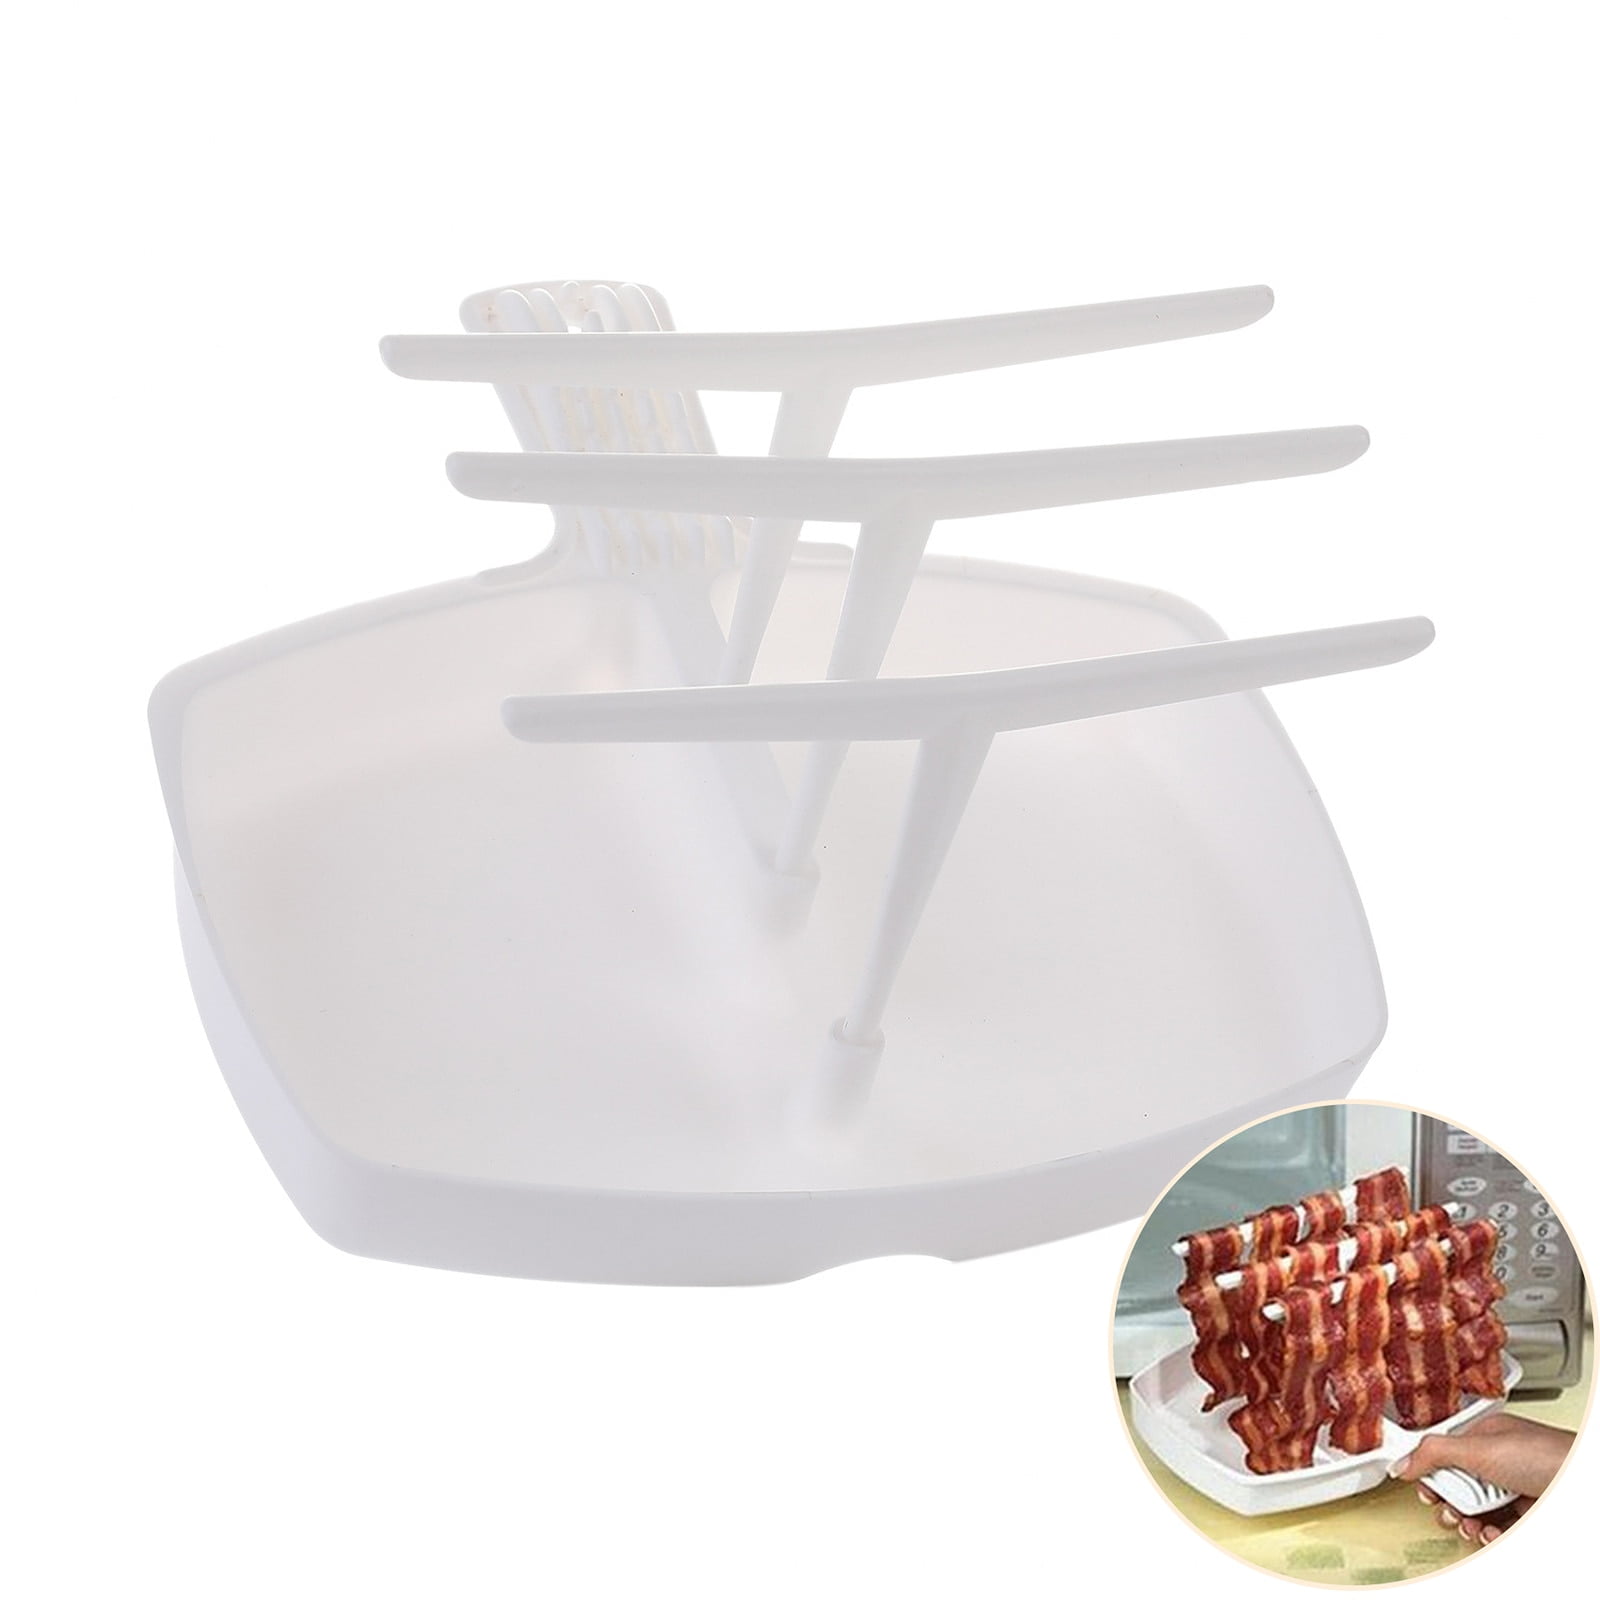  The Original Makin Bacon Microwave Bacon Dish - Makes Crispy  Bacon in Minutes - Simple, Quick, and Easy to Use - Reduces Fat Content for  a Healthier Meal - Molded in